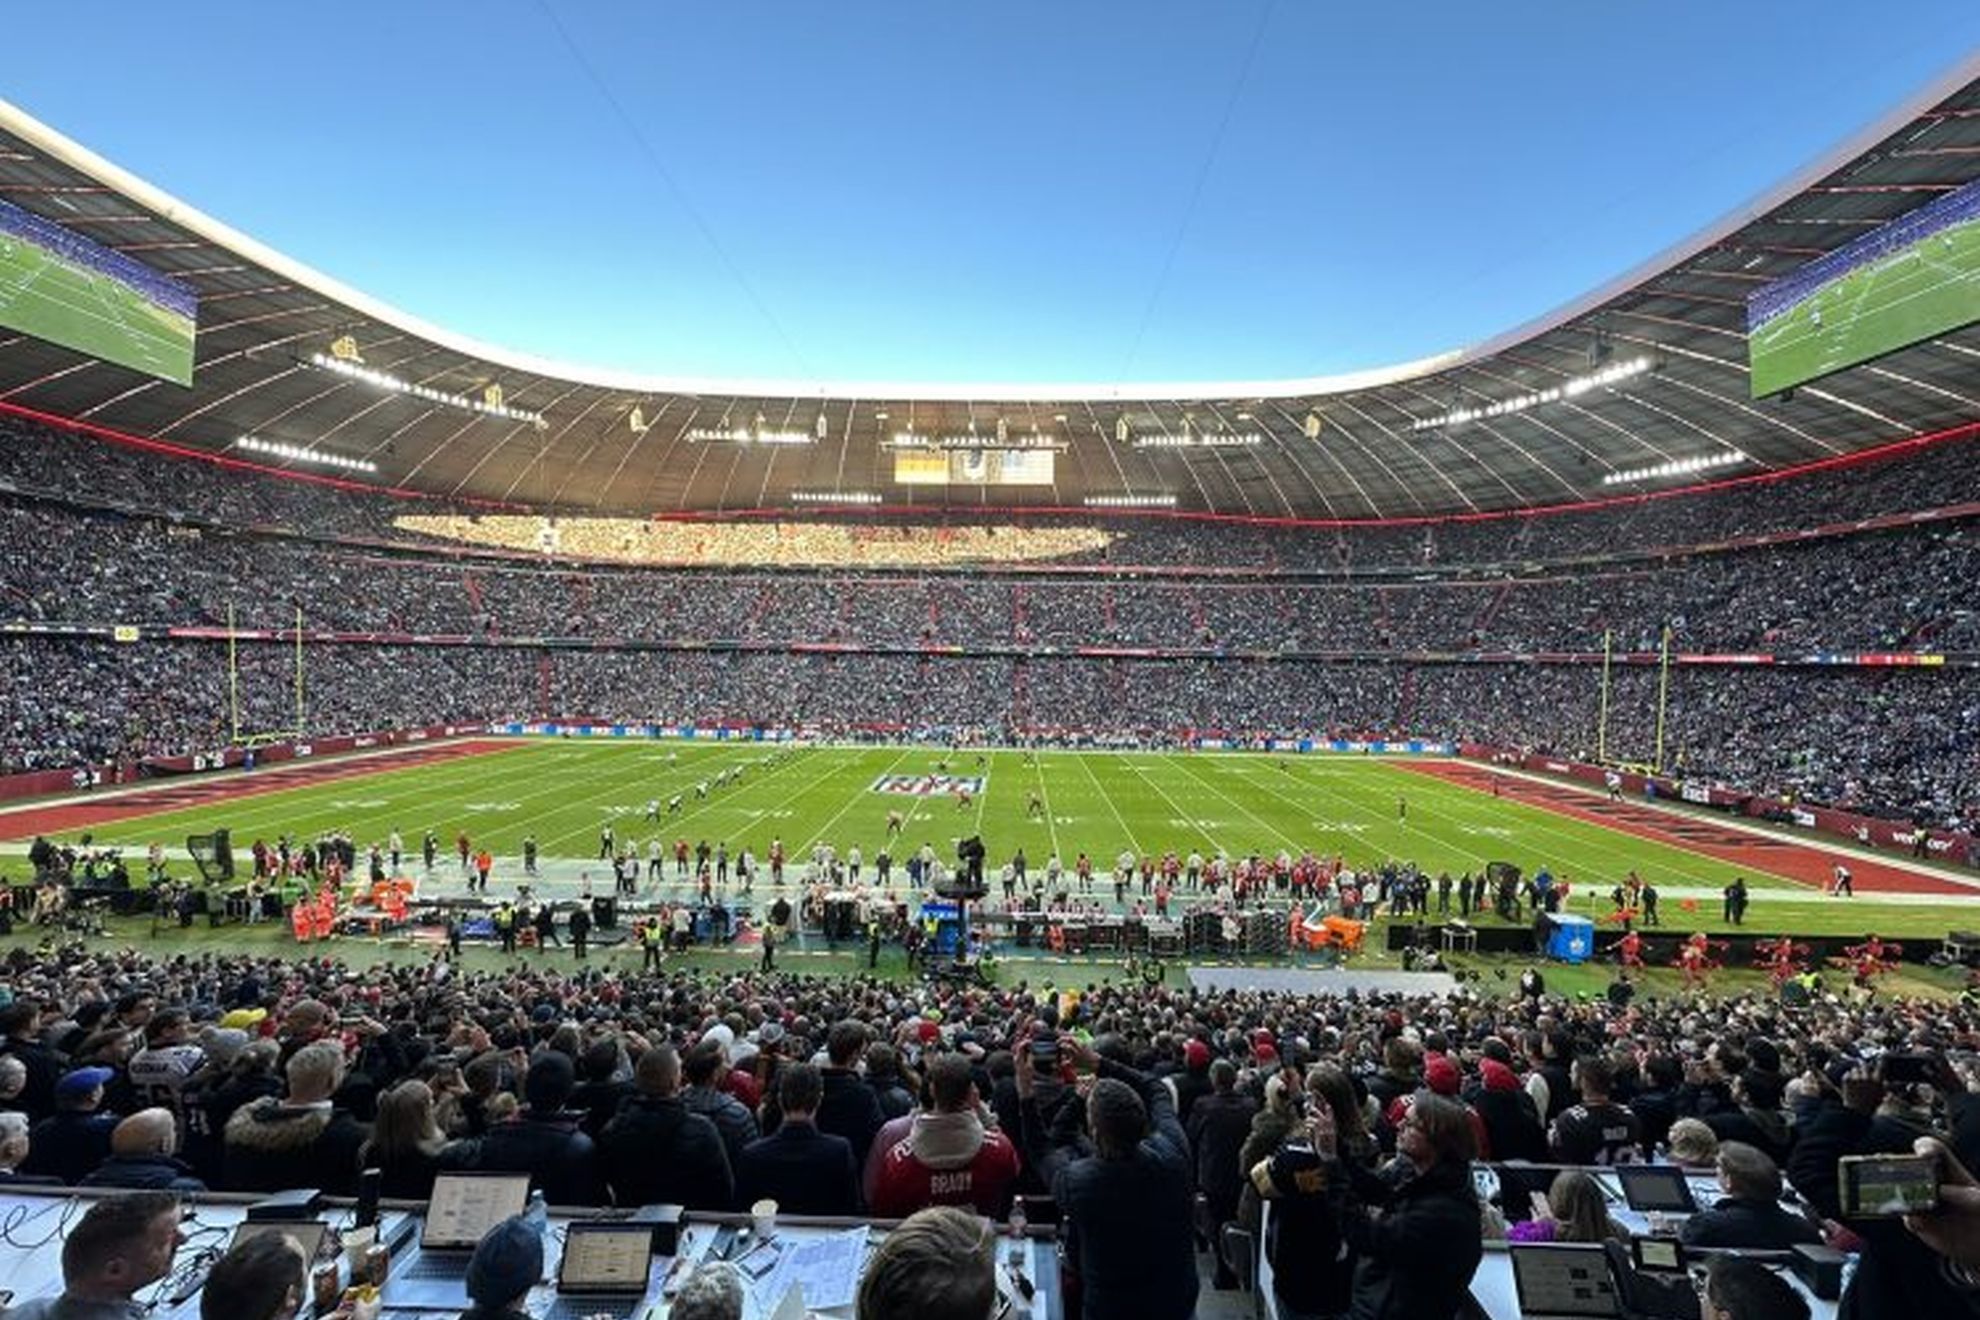 nfl games europe 2022